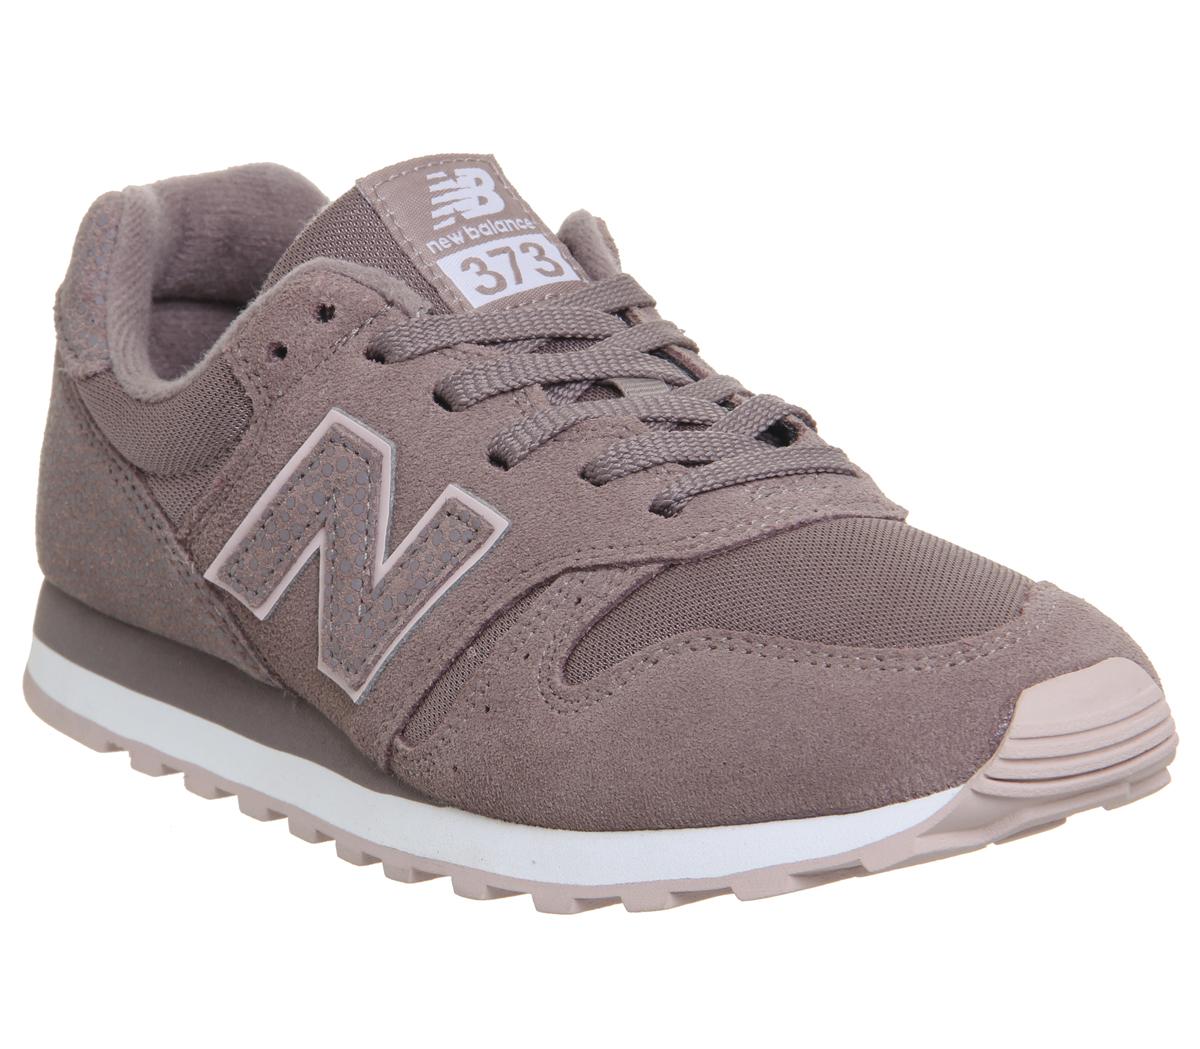 New Balance W373 Trainers Latte Exclusive - Hers trainers